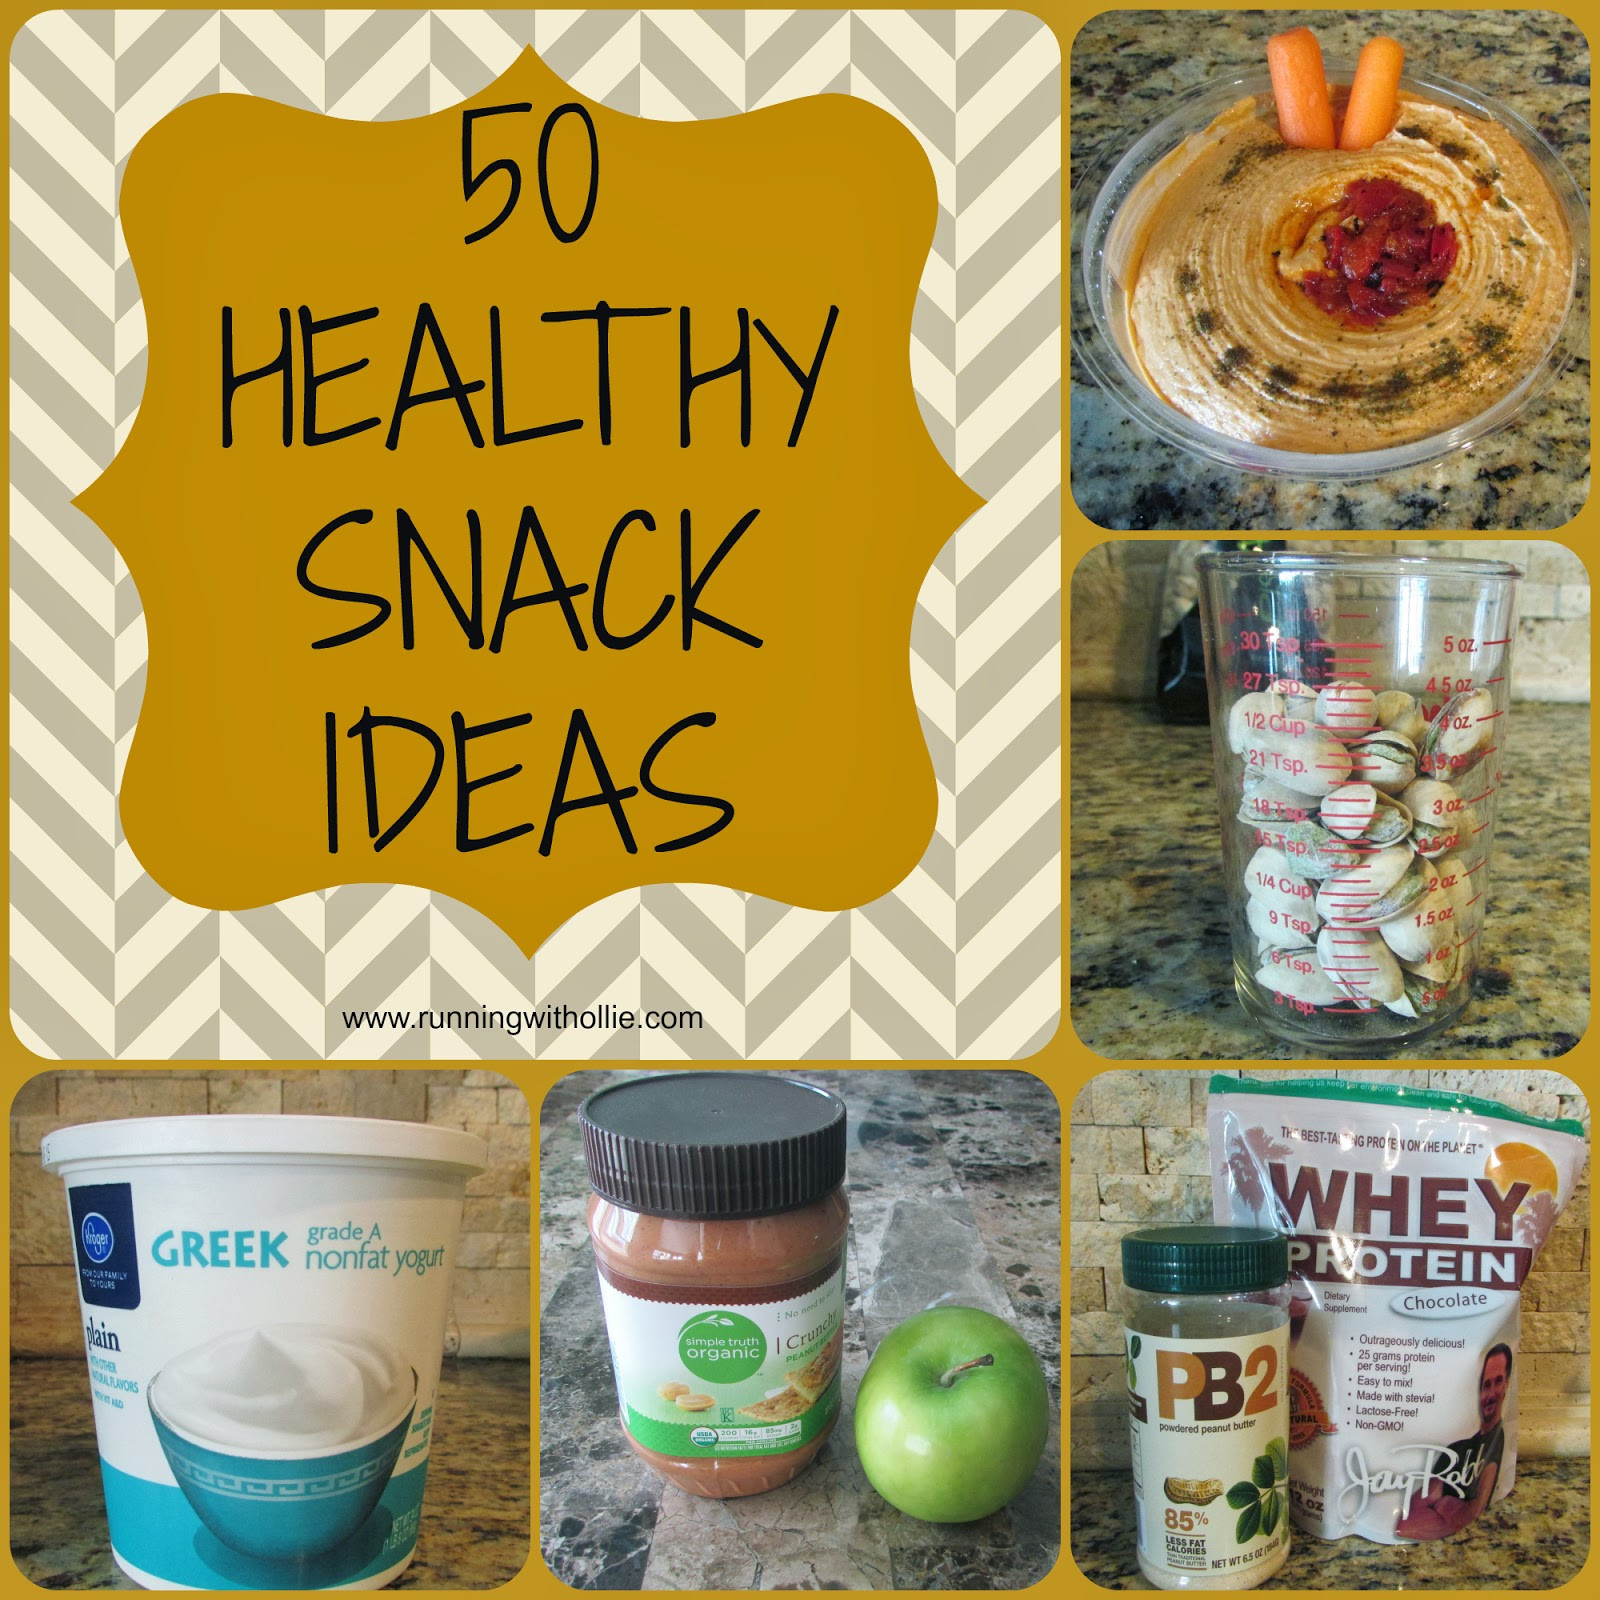 Quick Healthy Snacks
 RUNNING WITH OLLIE 50 Quick & Easy Healthy Snack Ideas